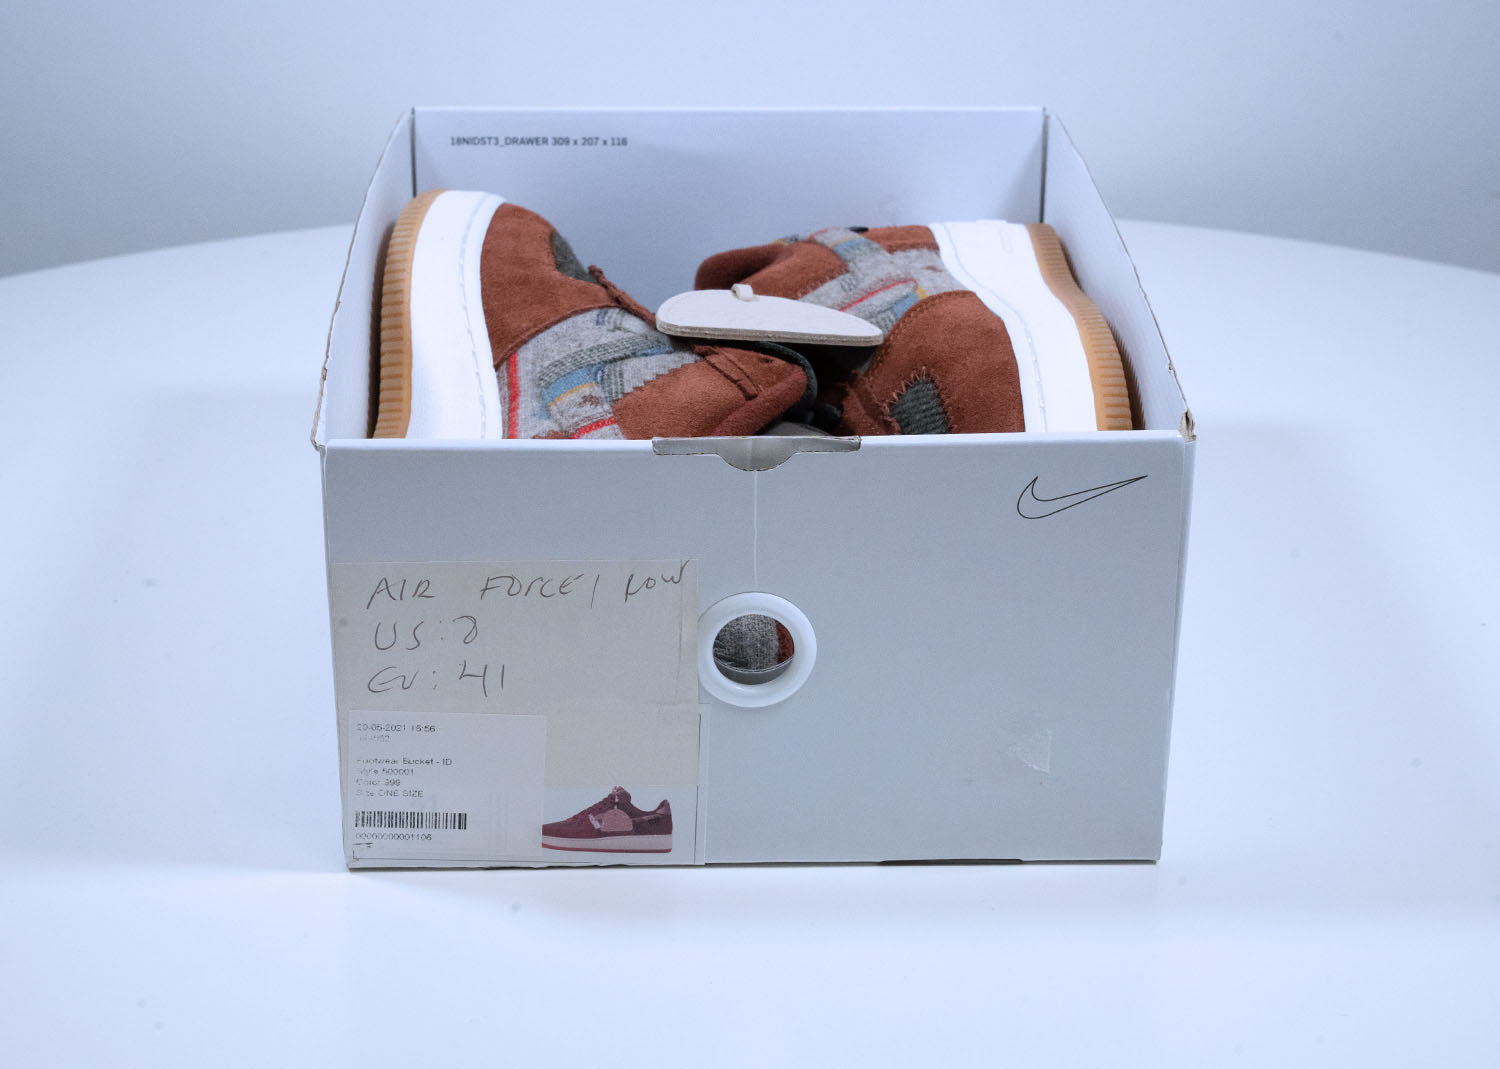 Second Chance - Nike Air Force 1 ID Pendleton Brown - 41